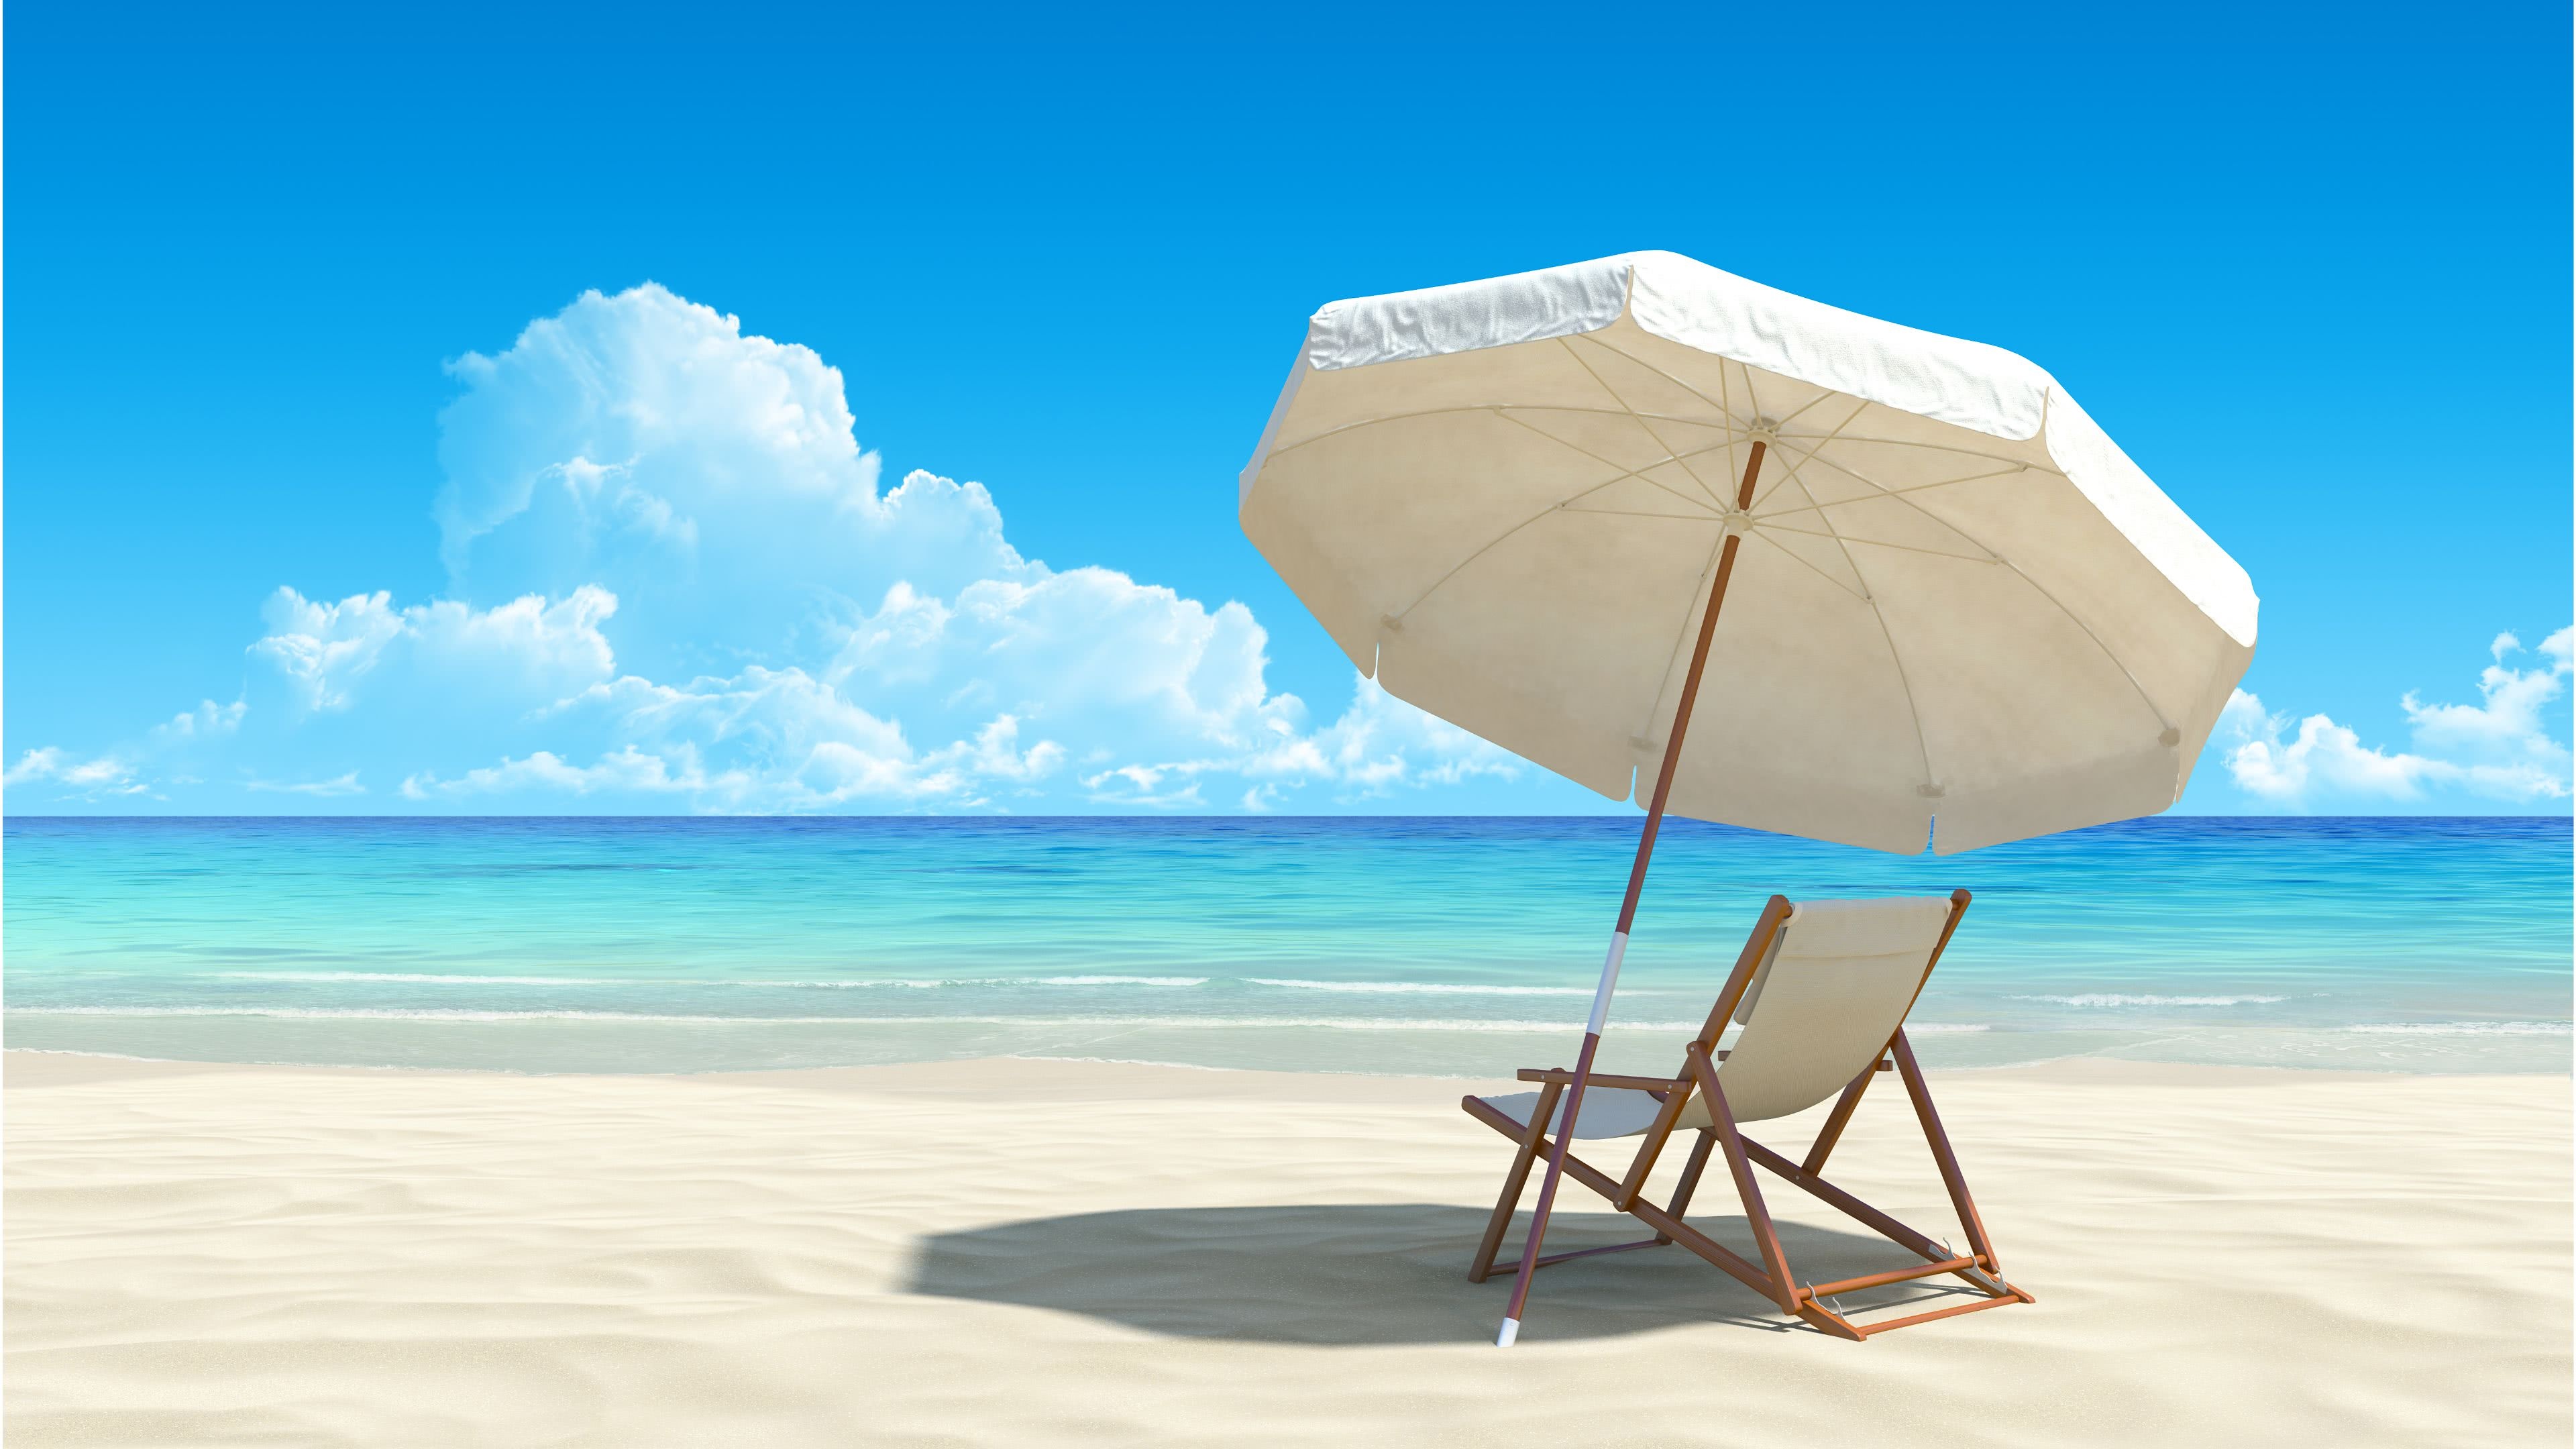 Beach Umbrella: A large parasol used to shade part of a patio, or recreation area. 3840x2160 4K Background.